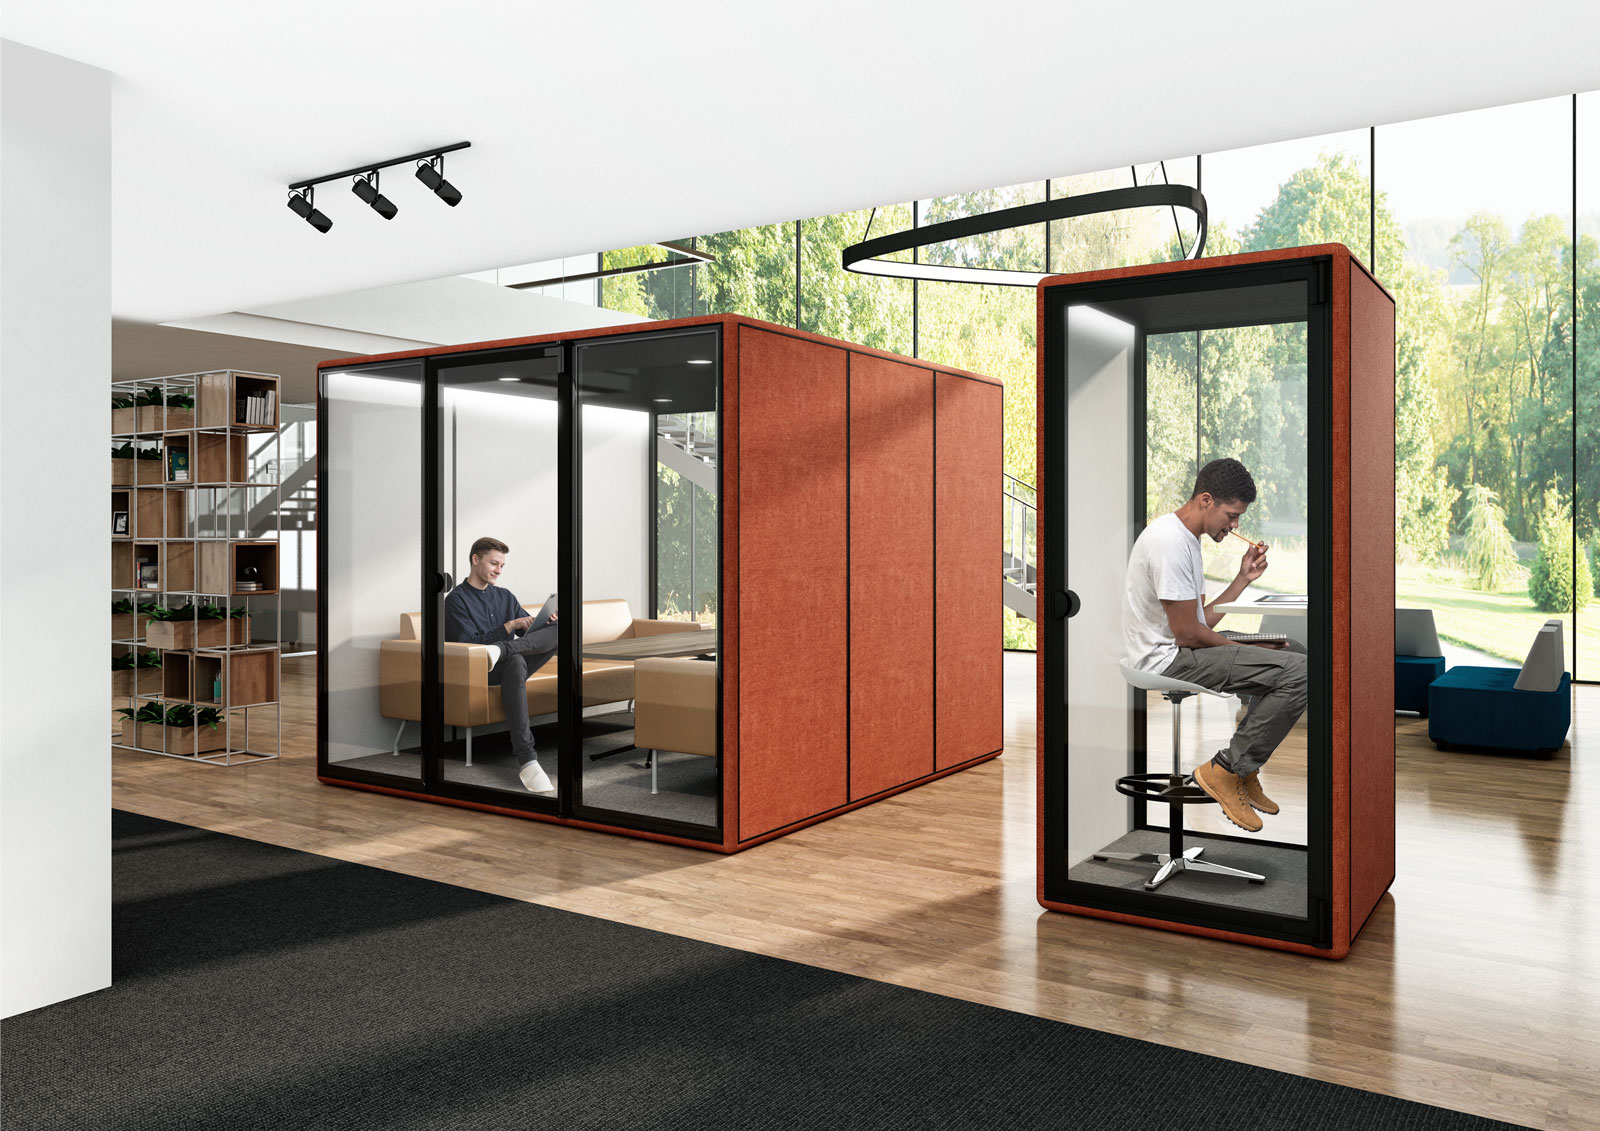 large conference pod and mini pod in orange fabric beside a breakout area